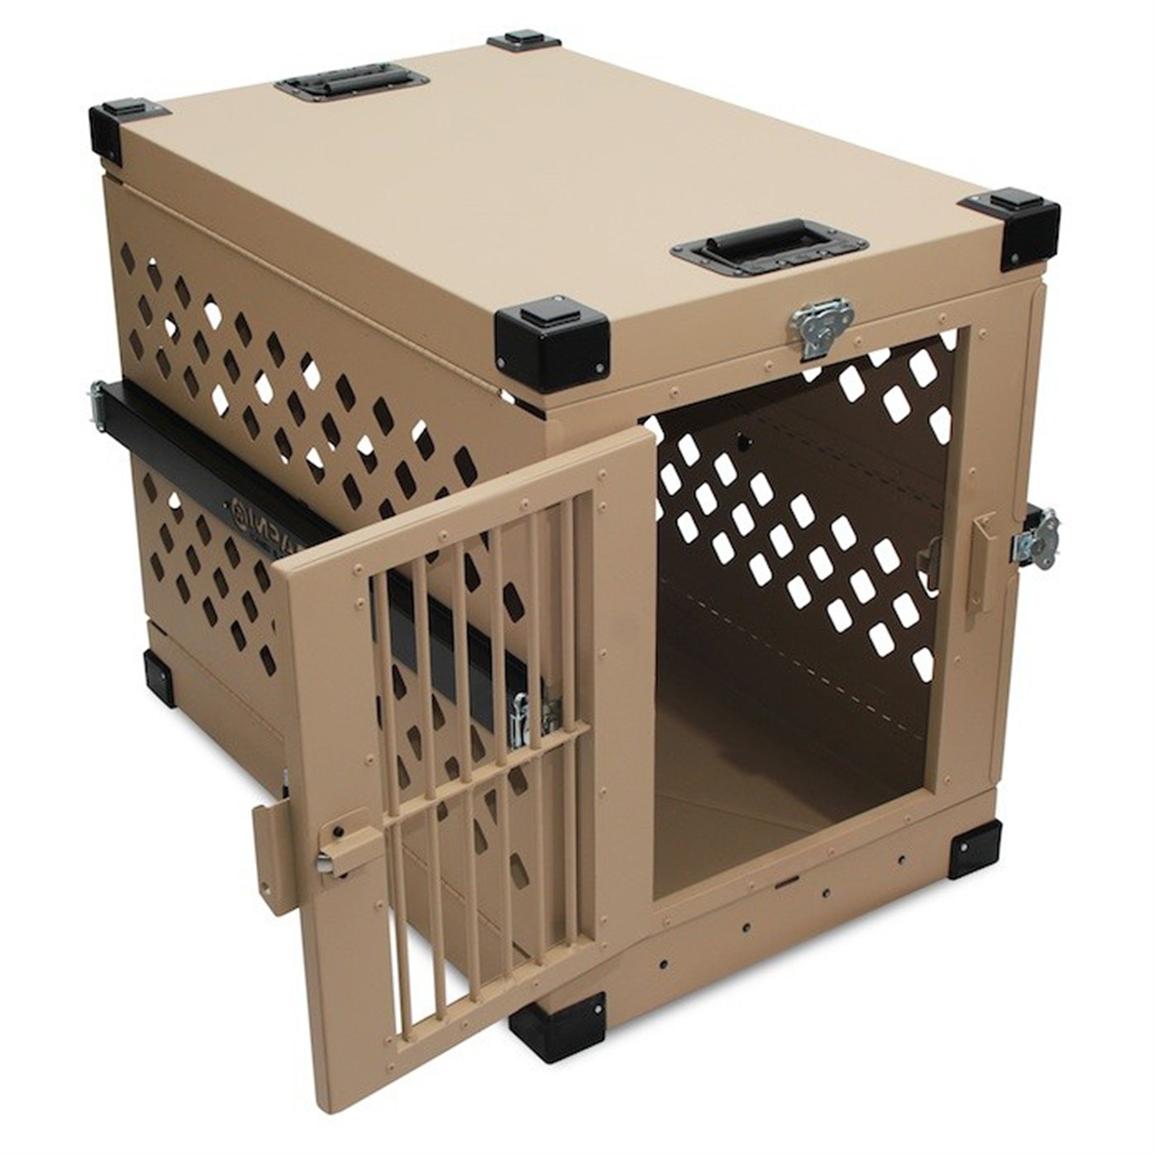 collapsible travel dog kennel